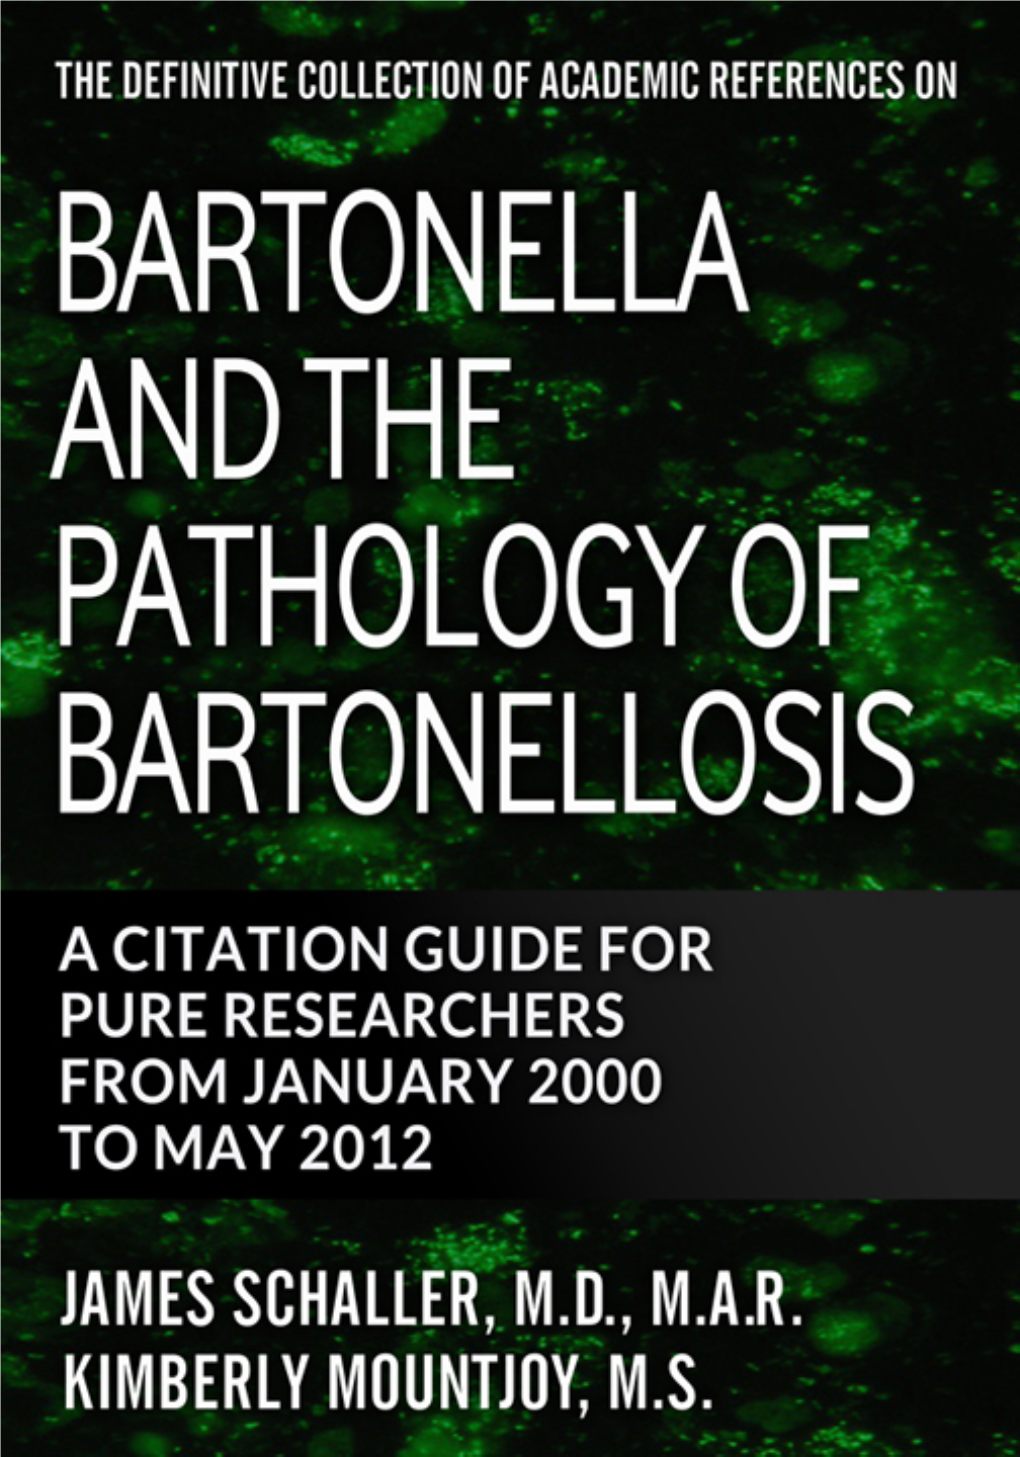 The Definitive Collection of Academic References on Bartonella and the Pathology of Bartonellosis